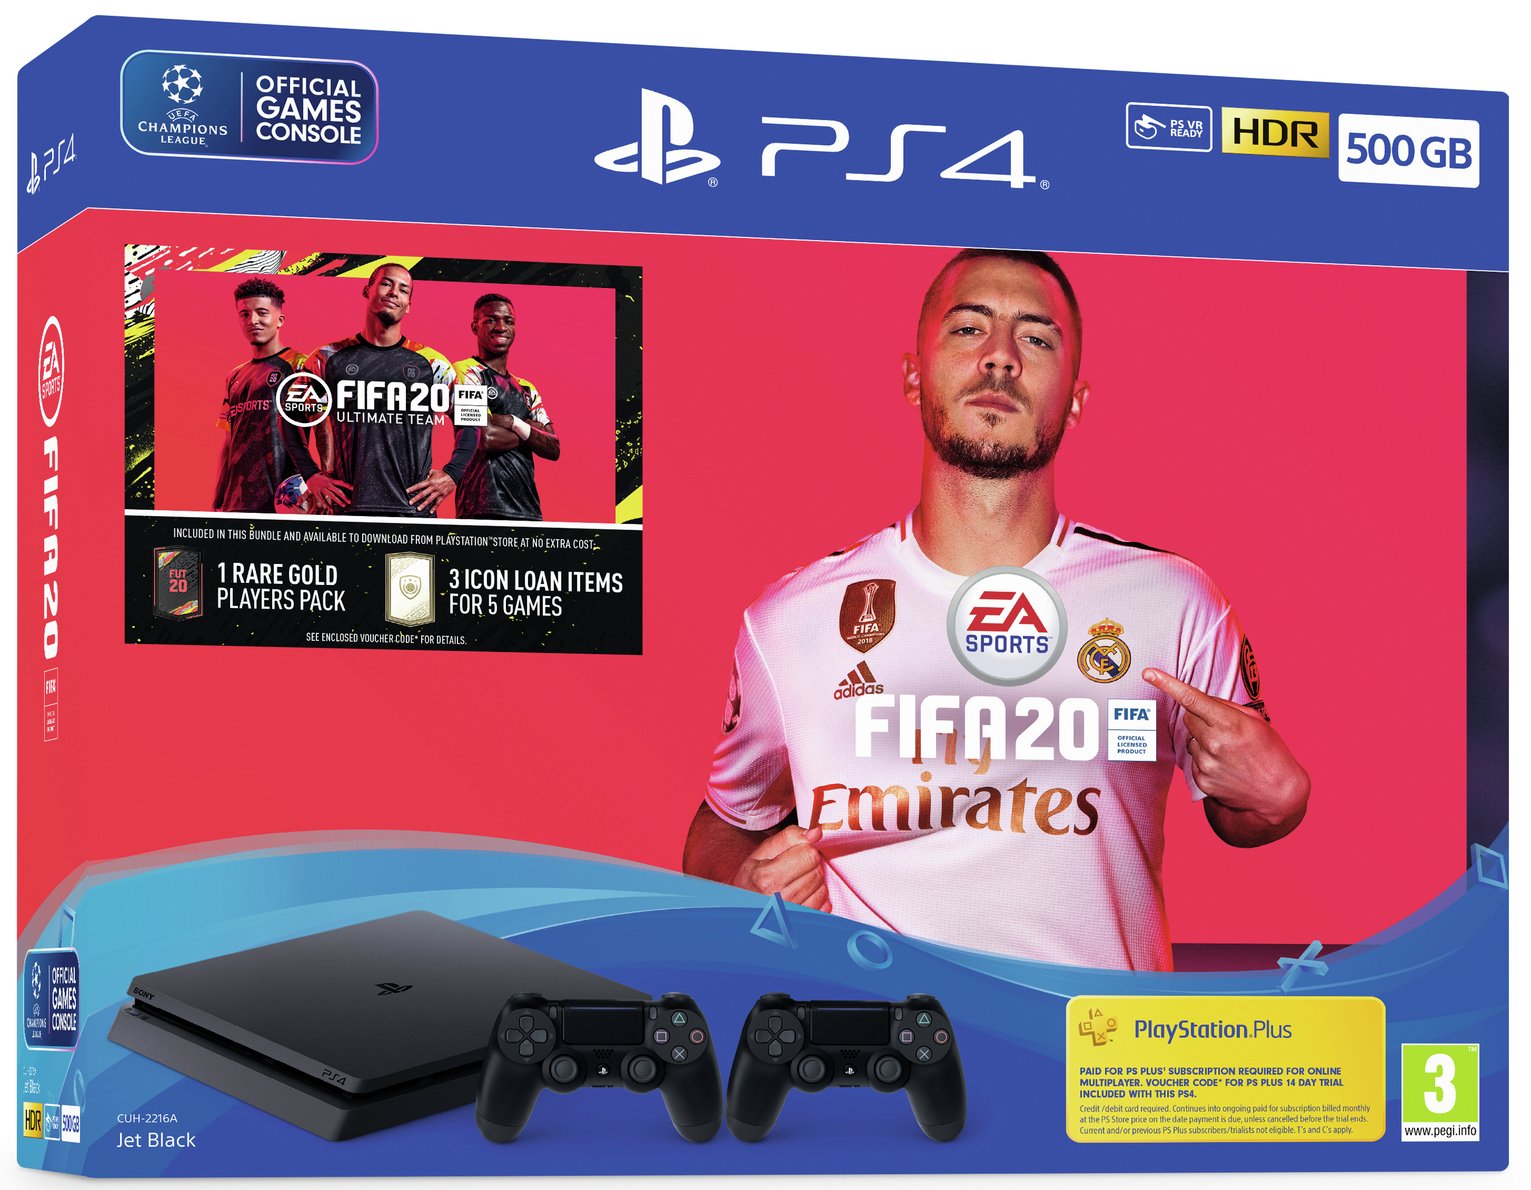 Sony PS4 500GB Console, FIFA 20 & 2 Controller Bundle